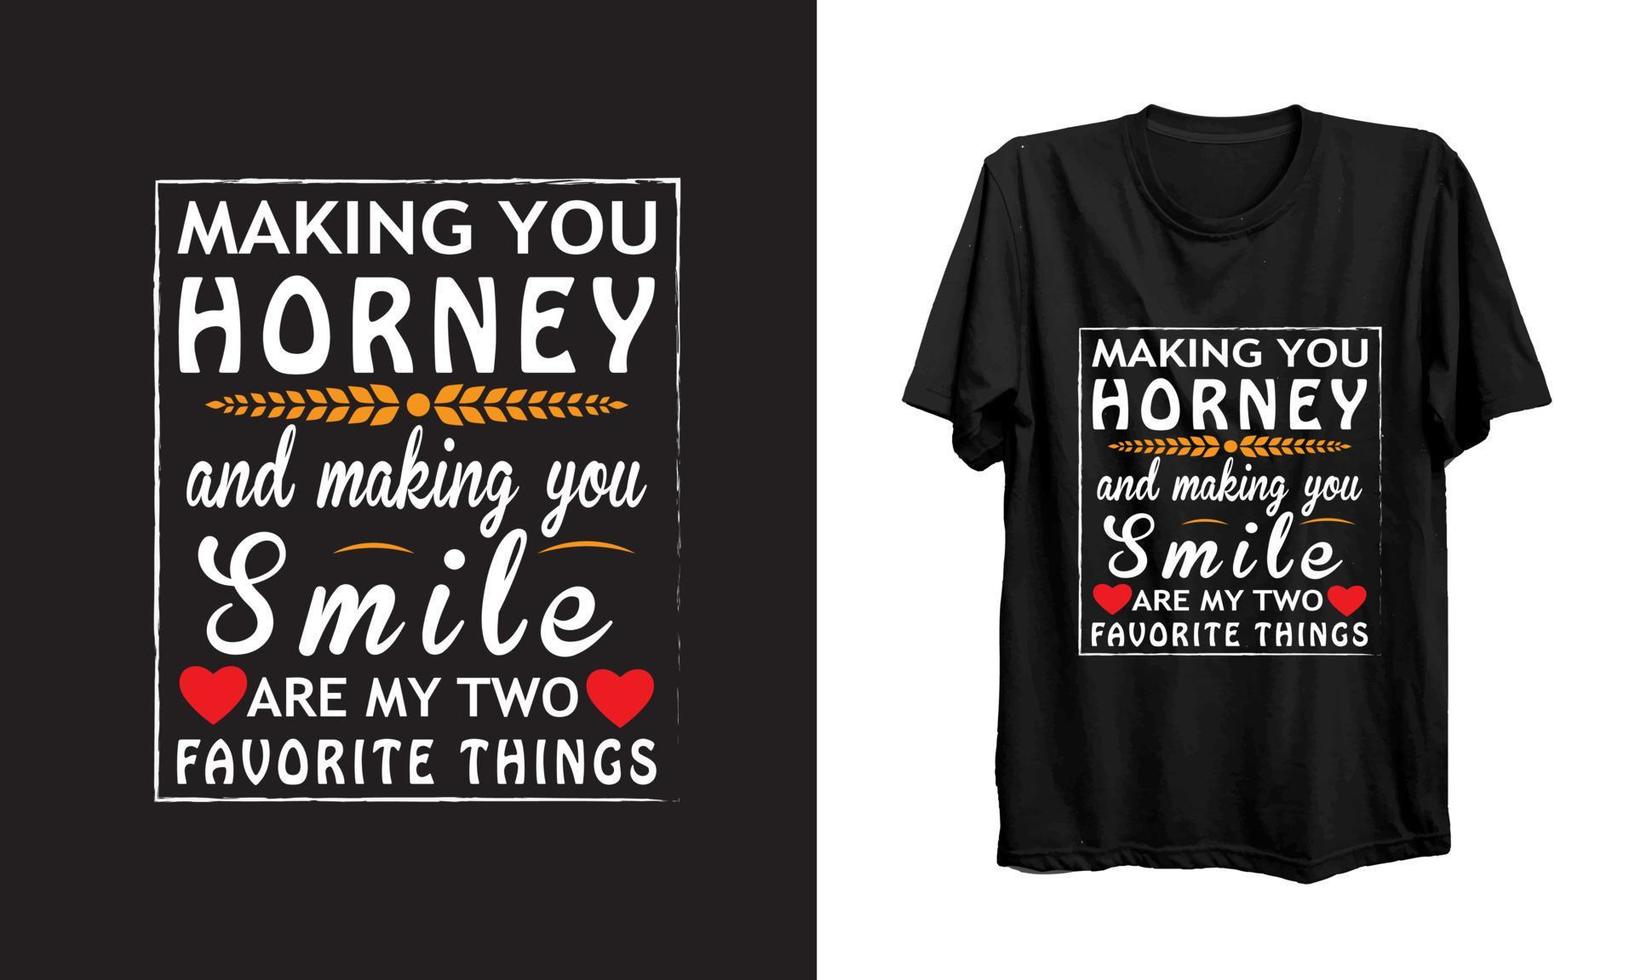 Making you horney and making you smile are my two favorite things. relationship t shirt design. vector